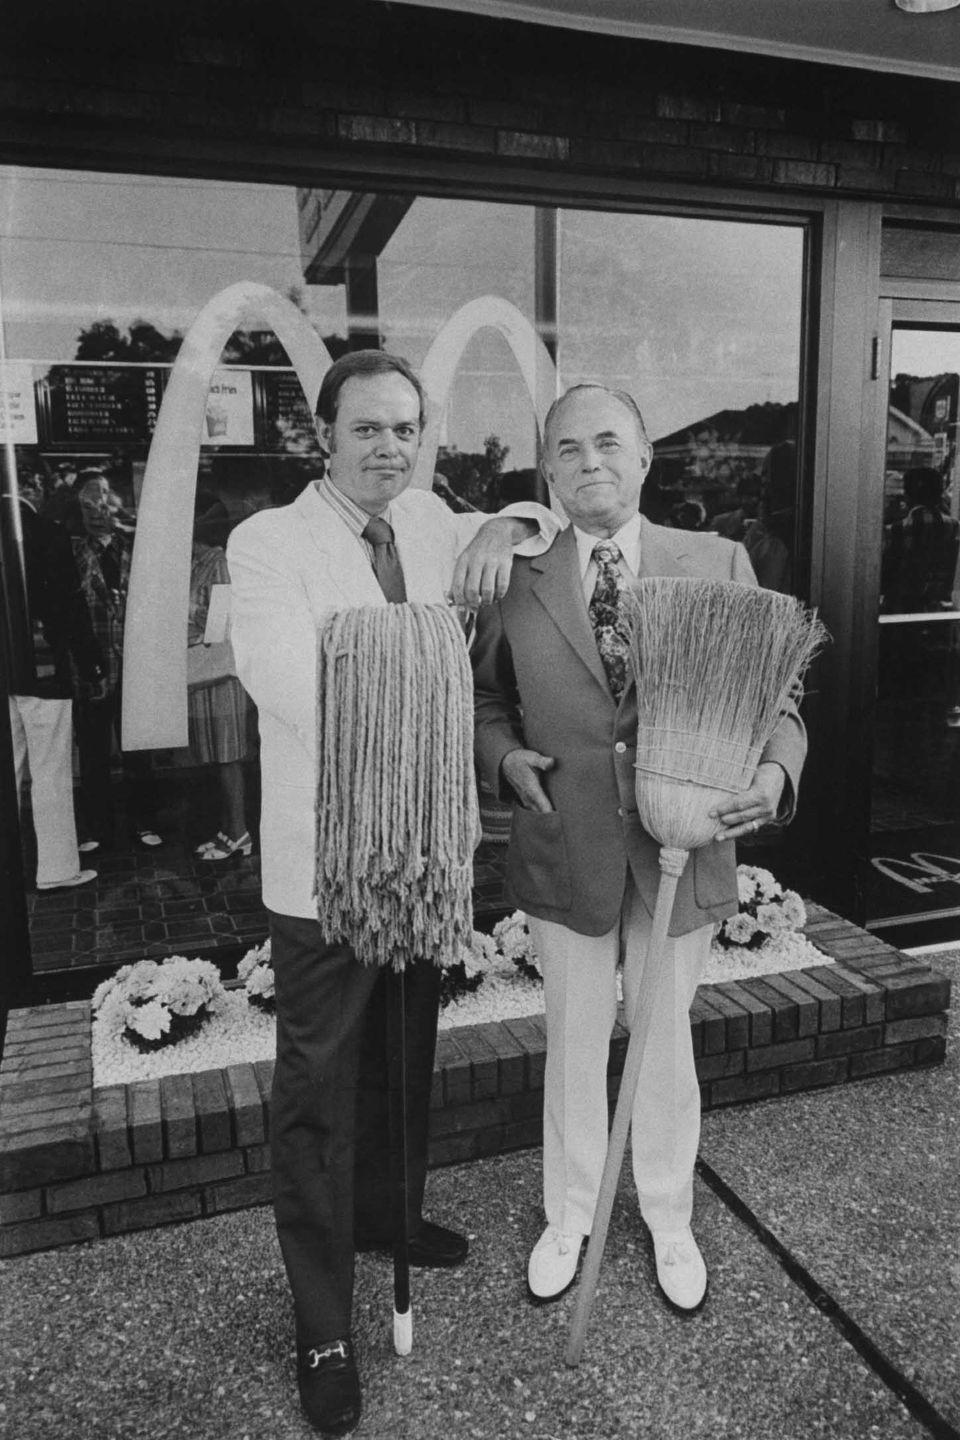 <p>President Frederick Turner and CEO Raymond Kroc posing in celebration of the opening of McDonald's 2,500th location, which was located in a suburban shopping center in Hickory Hills, Illinois. Not sure why they're holding a broom and mop, but OK!</p>